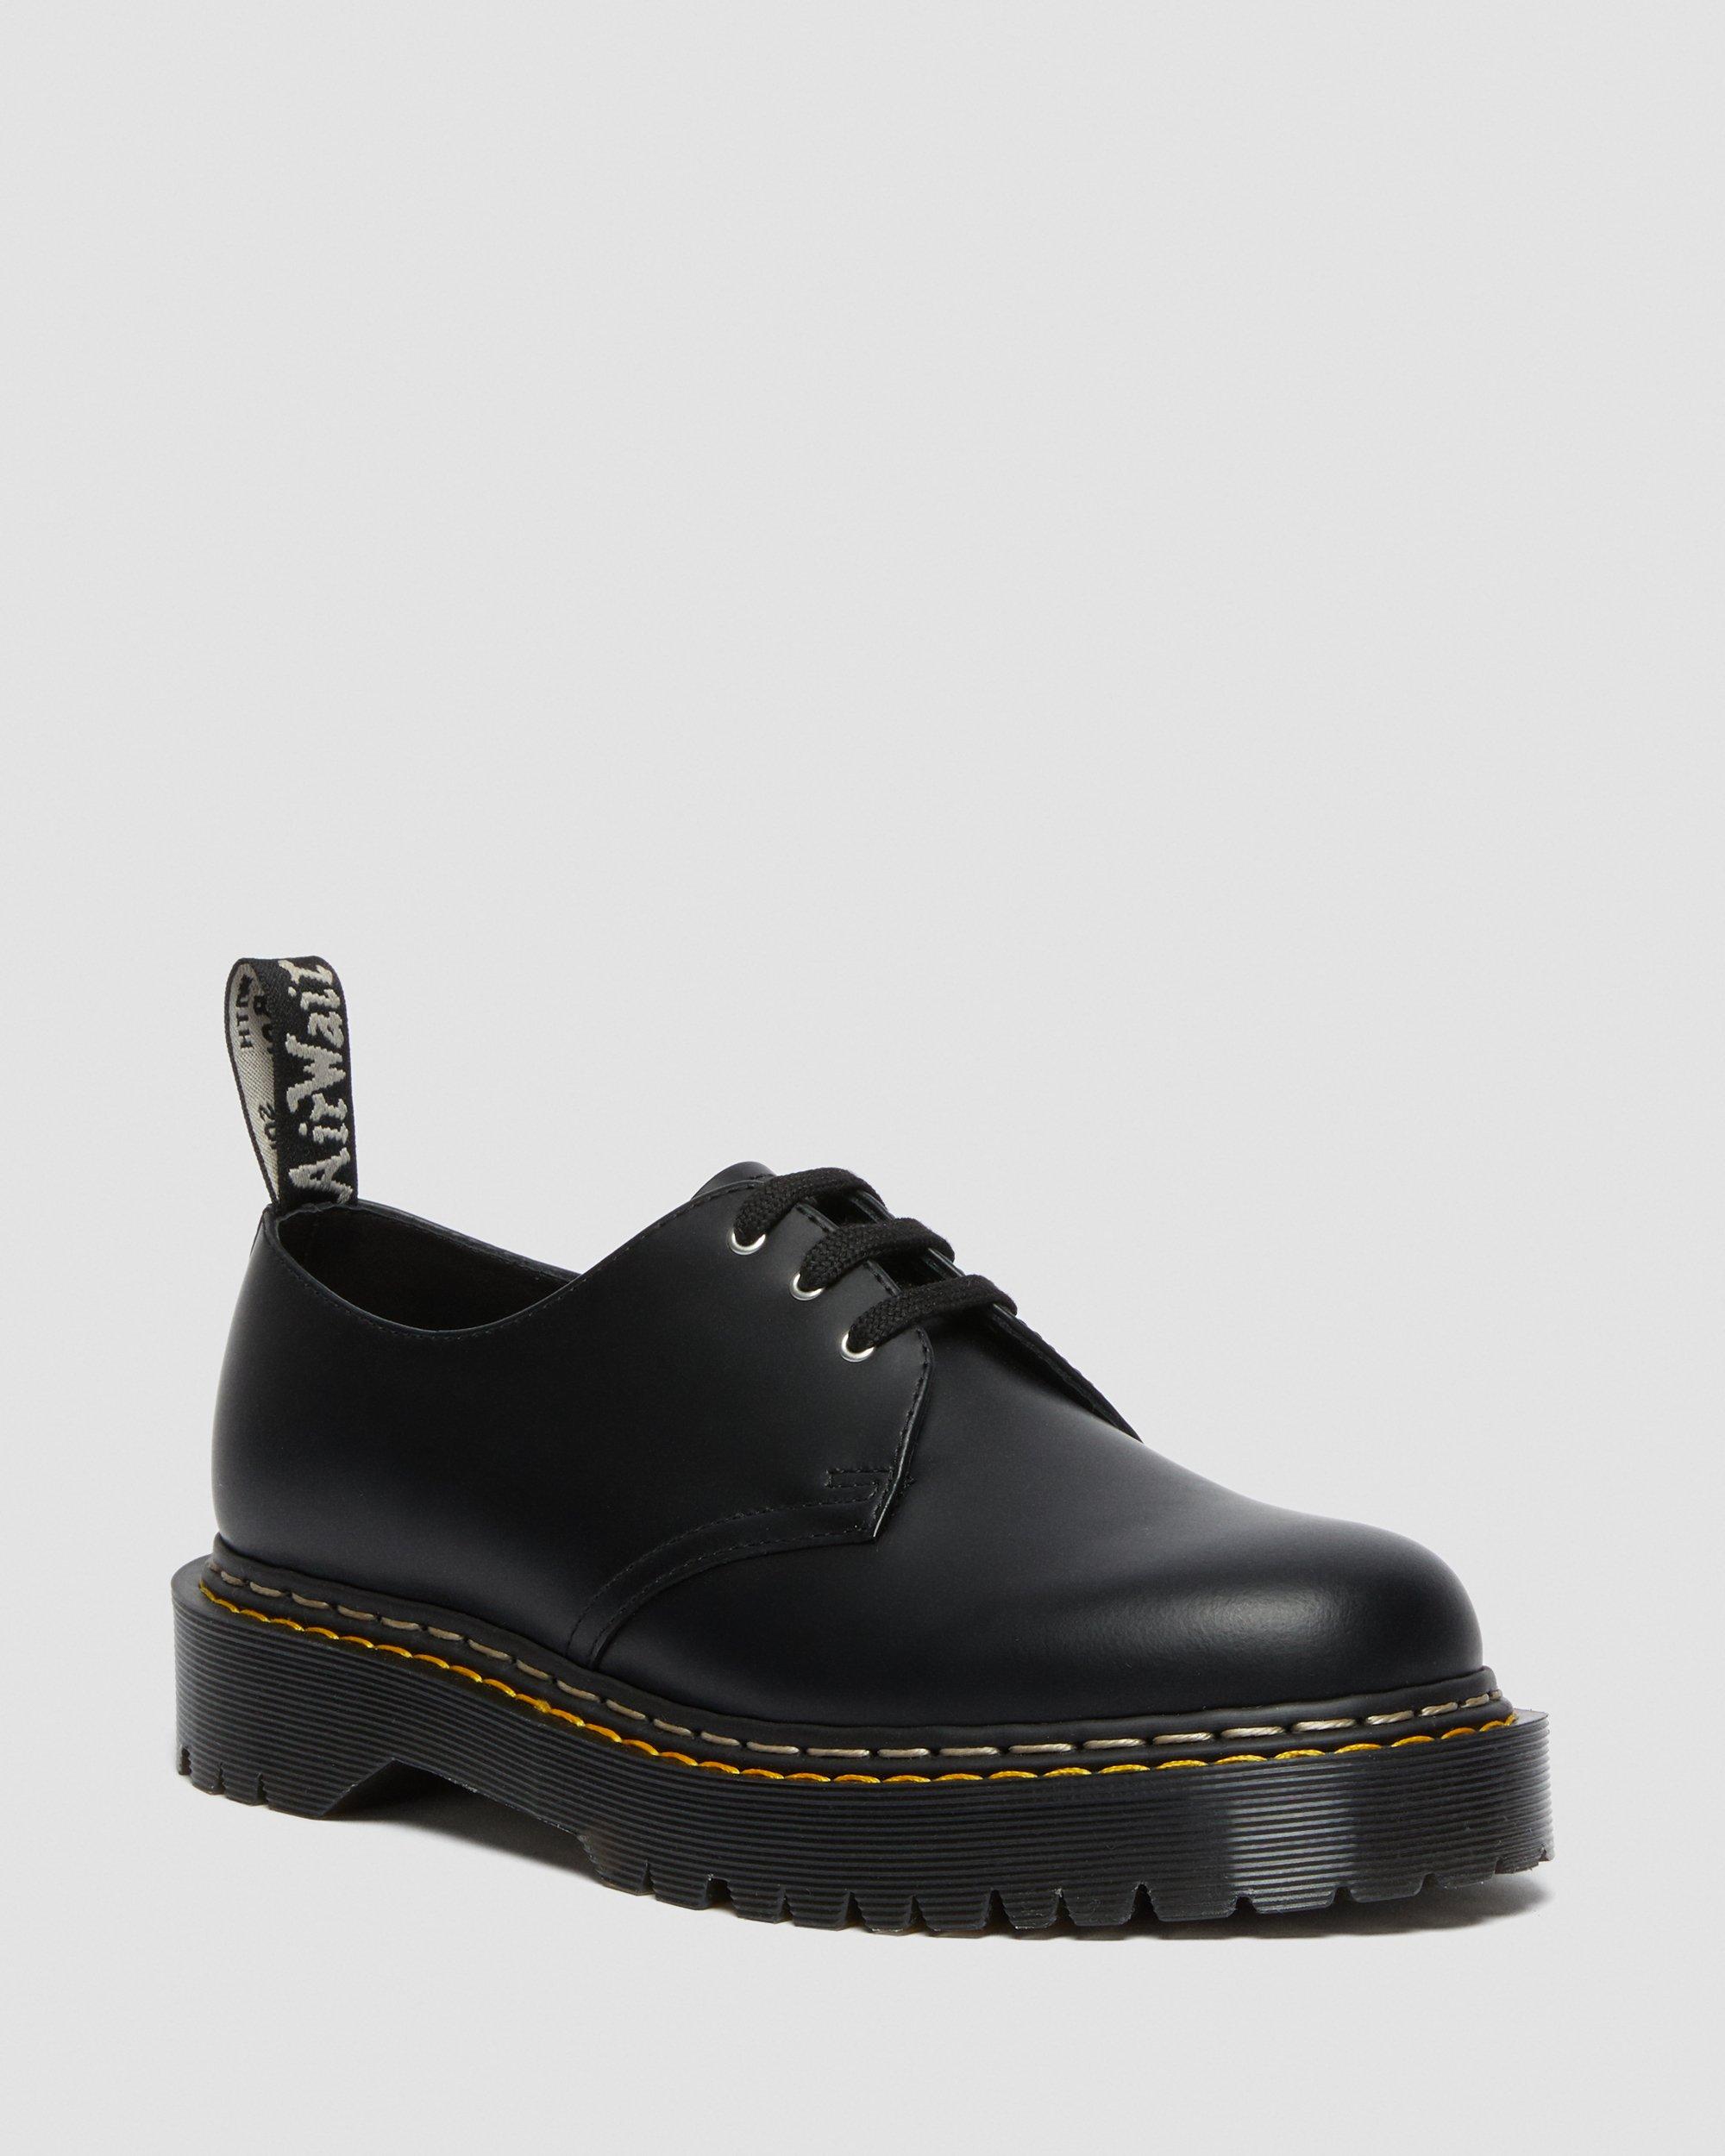 1461 Rick Owens Bex Leather Oxford Shoes in Black | Dr. Martens